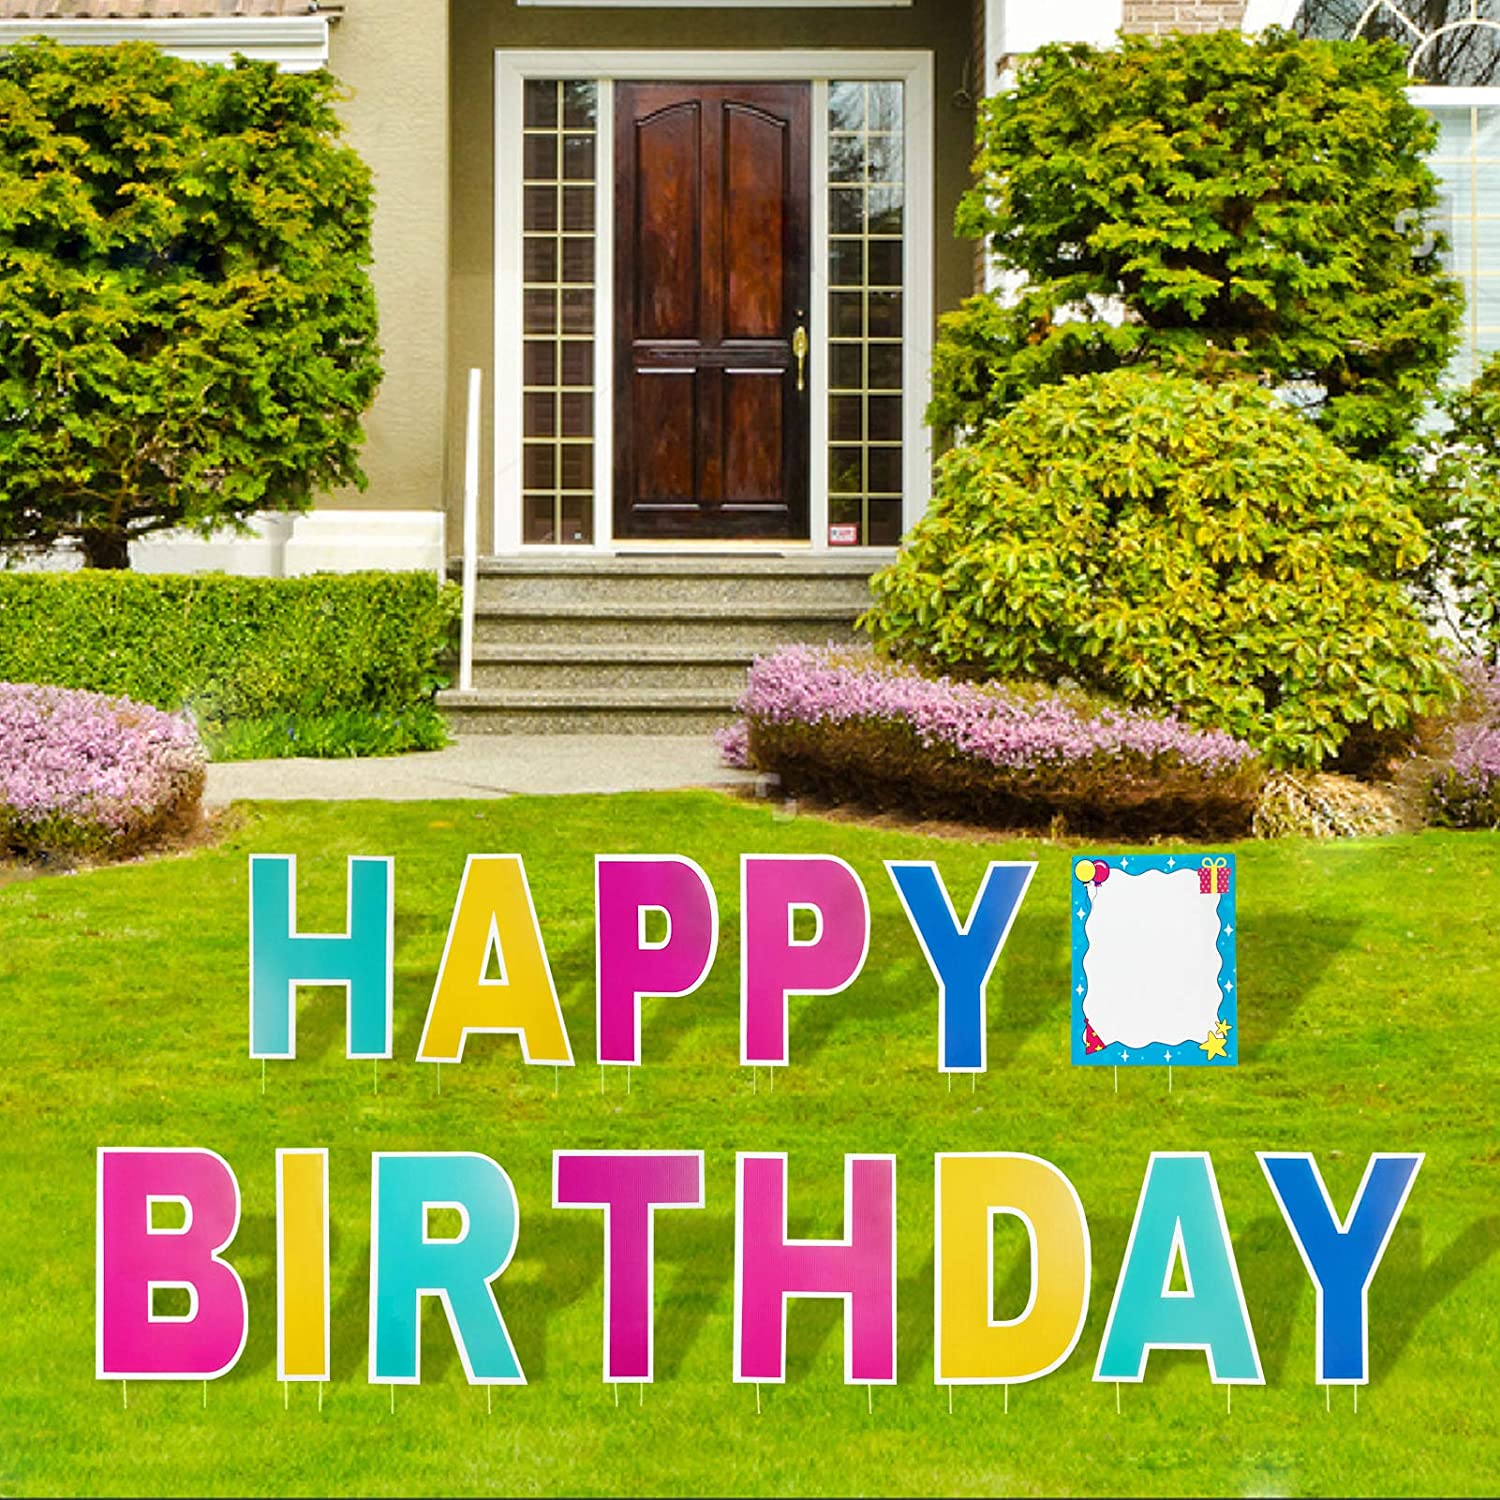 Renewable Design for Garden Outdoor Ornaments - Happy Birthday Yard Sign 16 Inch Birthday Letters Lawn Sign Colorful Birthday Yard Decoration with Stakes Cake Balloon Waterproof Garden Lawn Decor ...